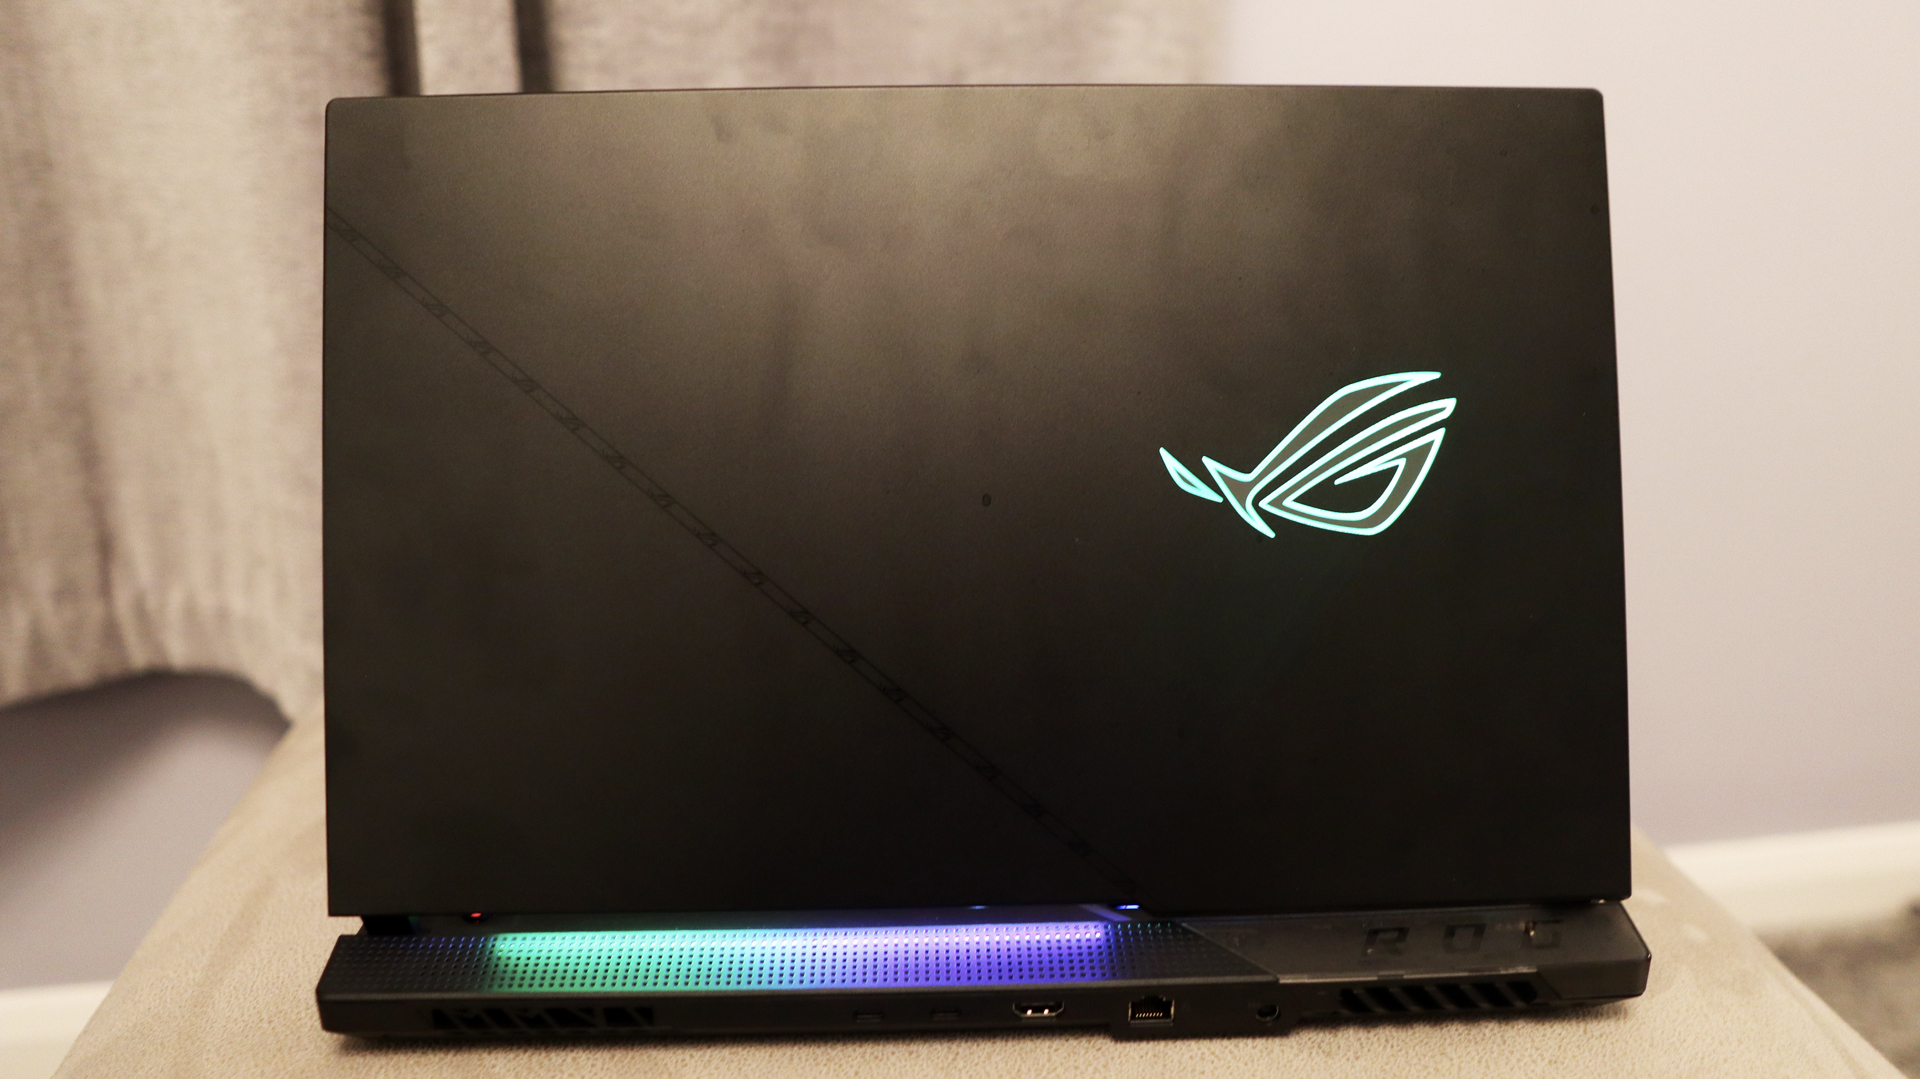 Asus ROG Strix Scar 17 review: gaming laptop on beige stand, plastic chassis lit with RGB logo